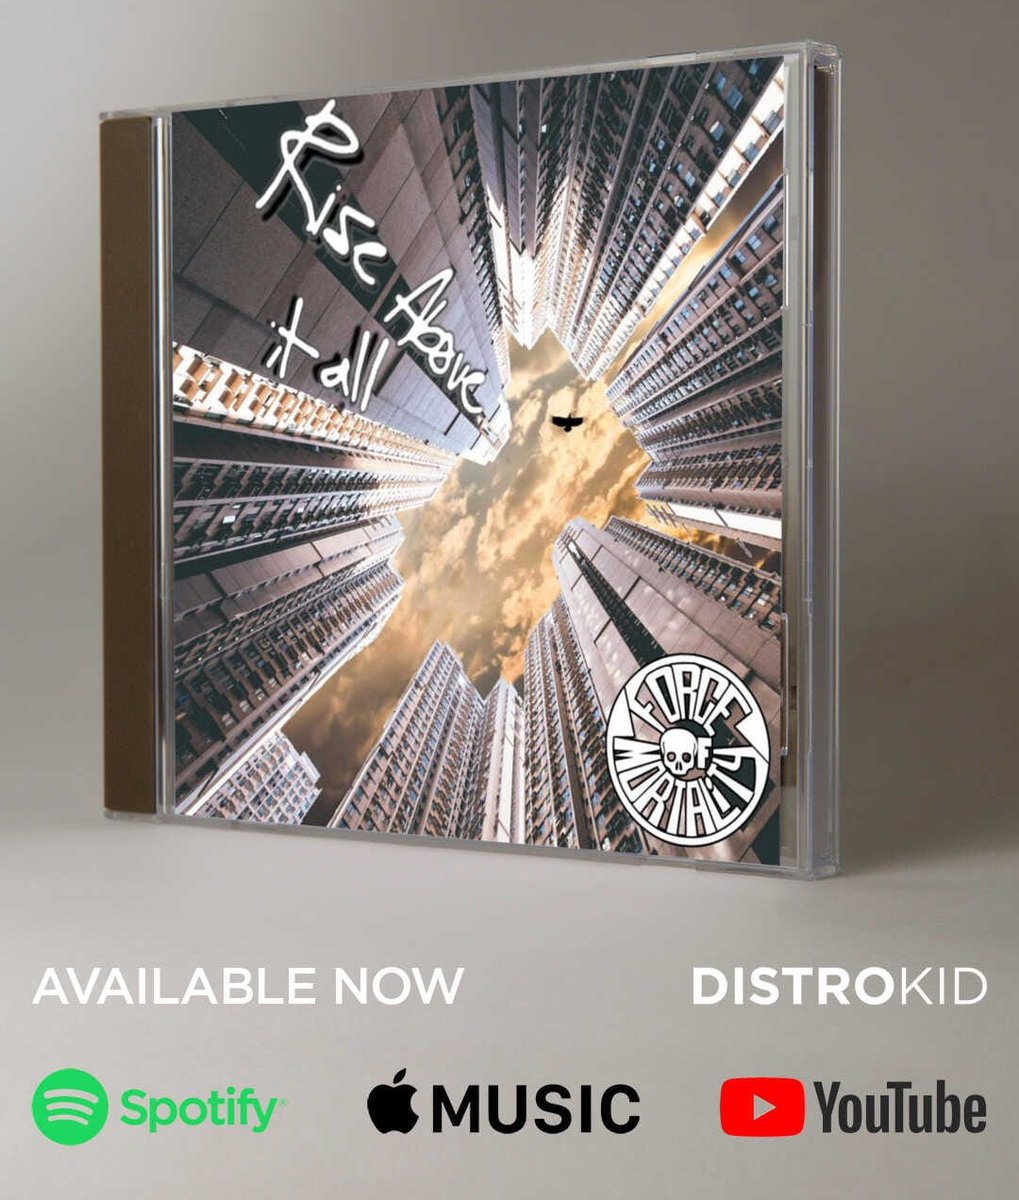 It's alive!

Our new single, 'Rise Above It All' is now available on all streaming platforms.

See our bio for the official video. Crank it loud!🤘🤘

#Metal #NewMusic #NewRelease #Oxford #OxfordMetal #ForceOfMortality #RiseAboveItAll #MetalFam #HeavyMetal #ThrashMetal #Distrokid